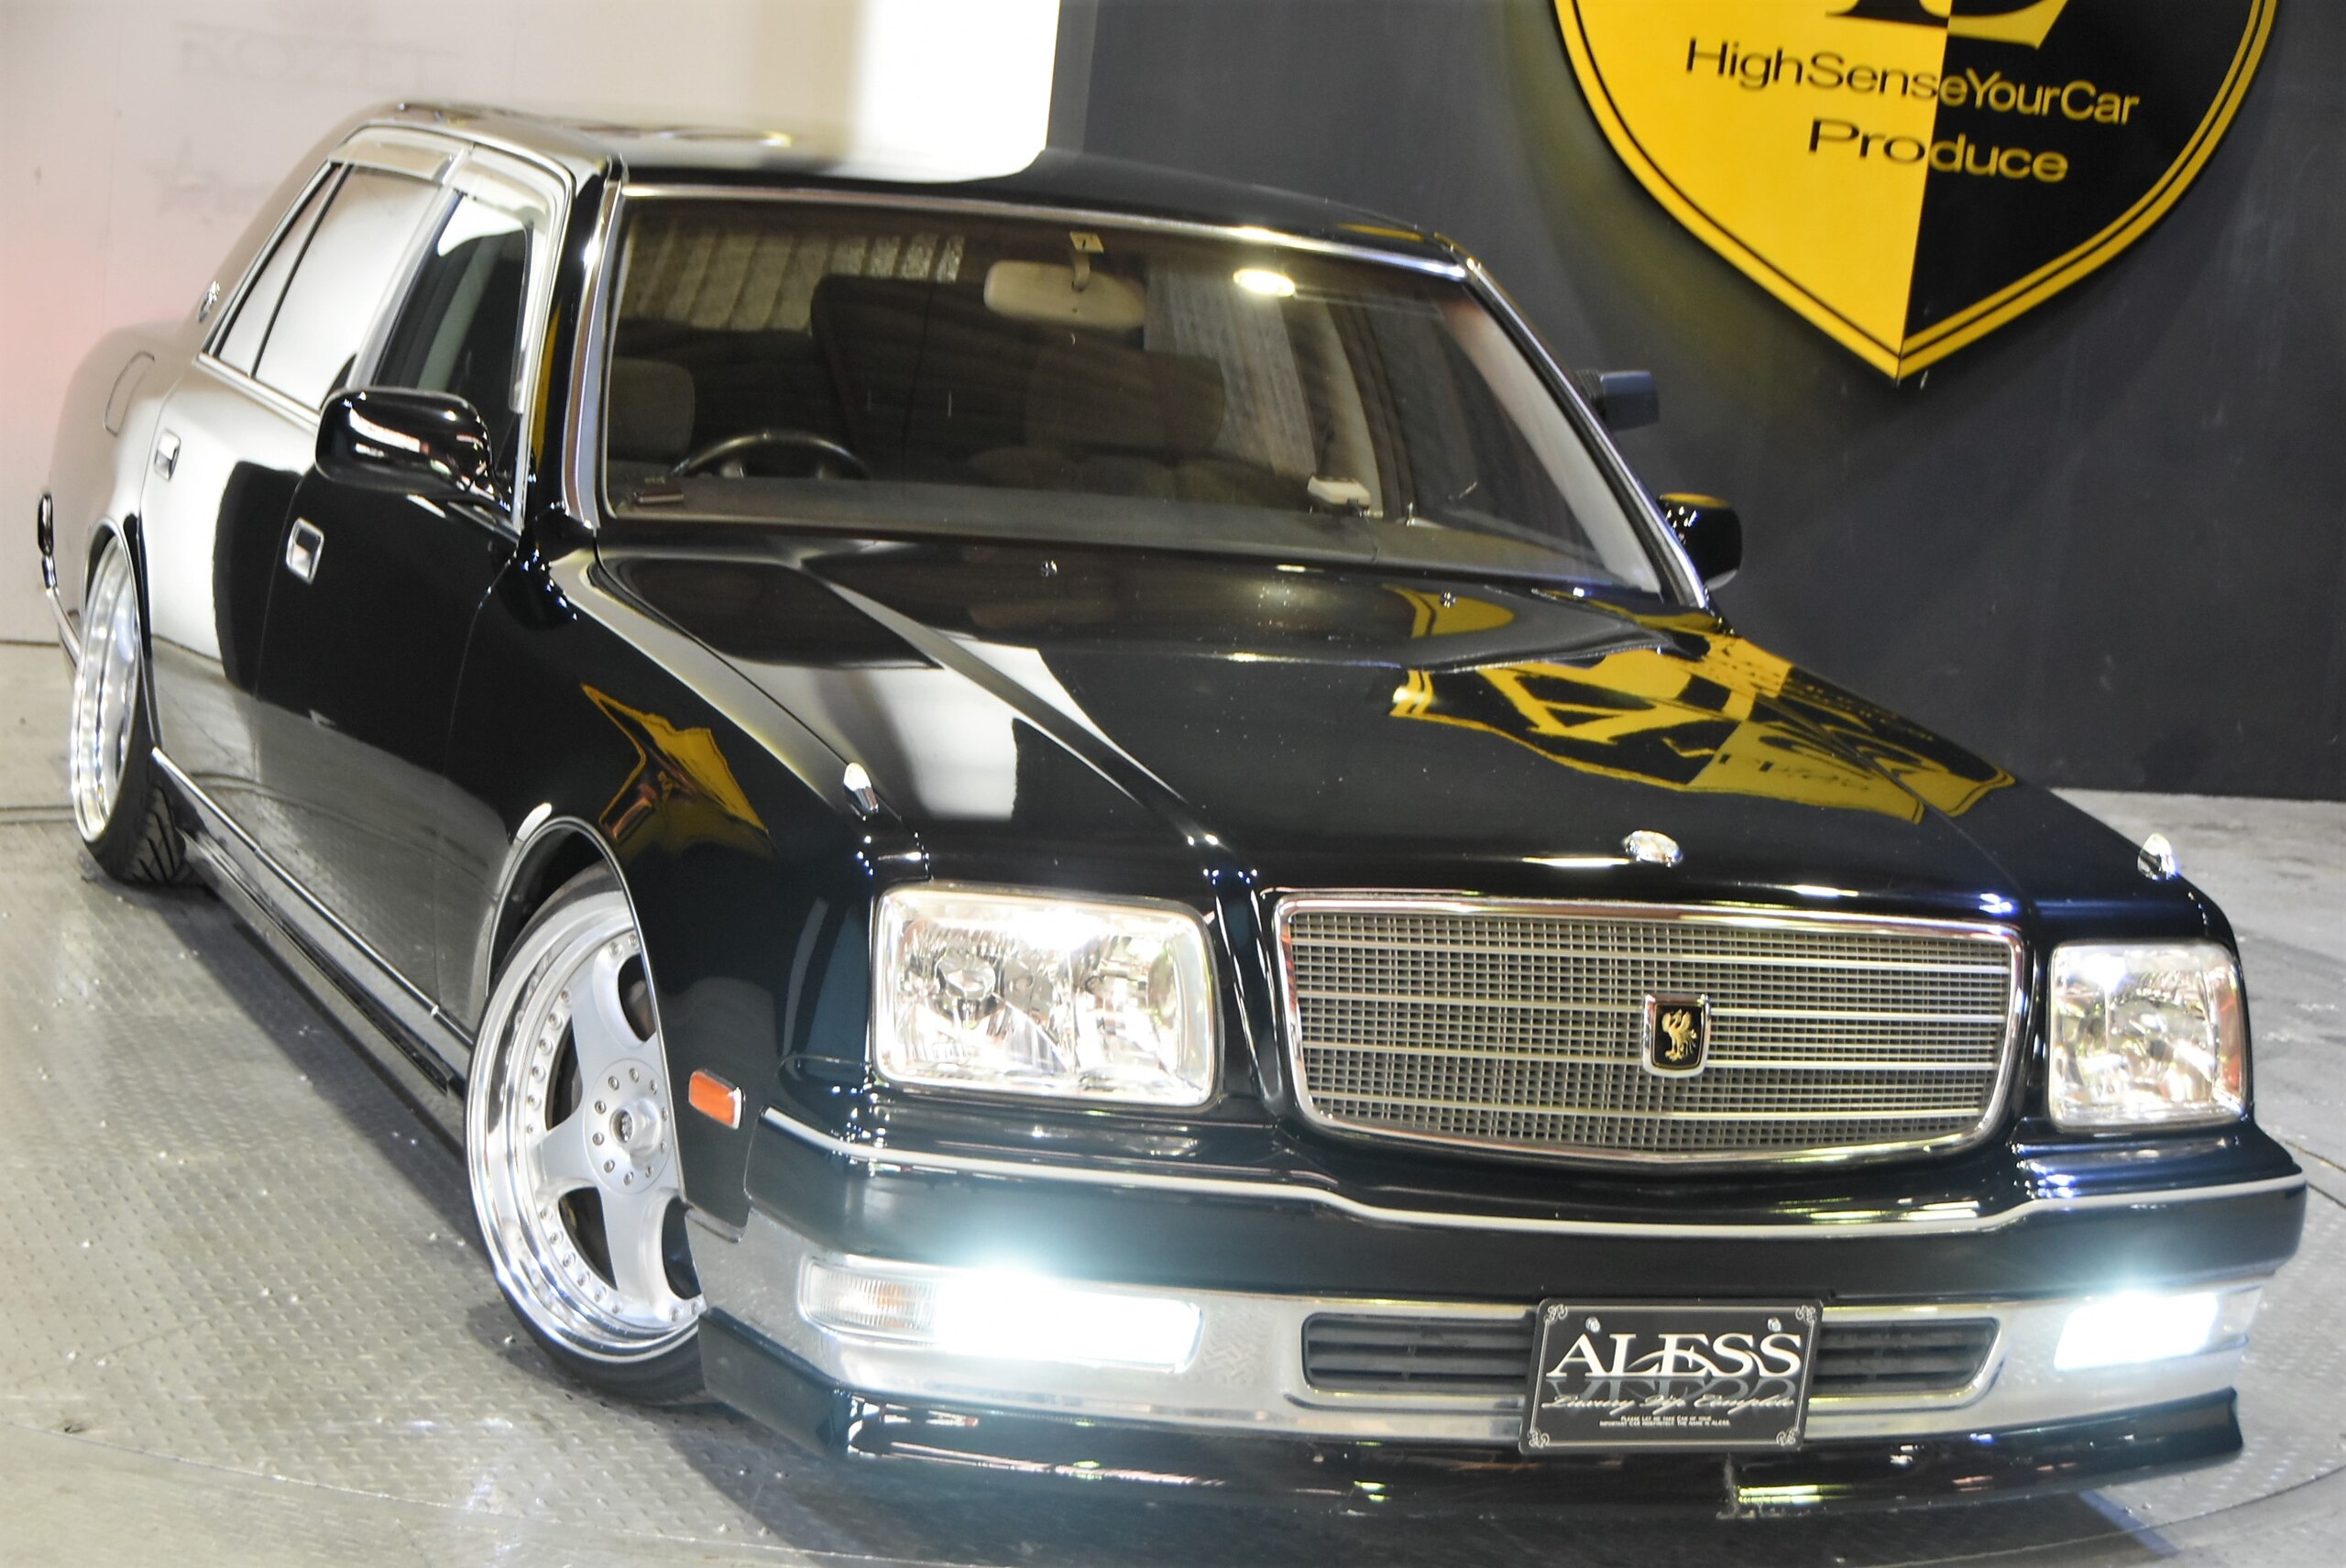 Used TOYOTA CENTURY 1997 CFJ8579393 in good condition for sale